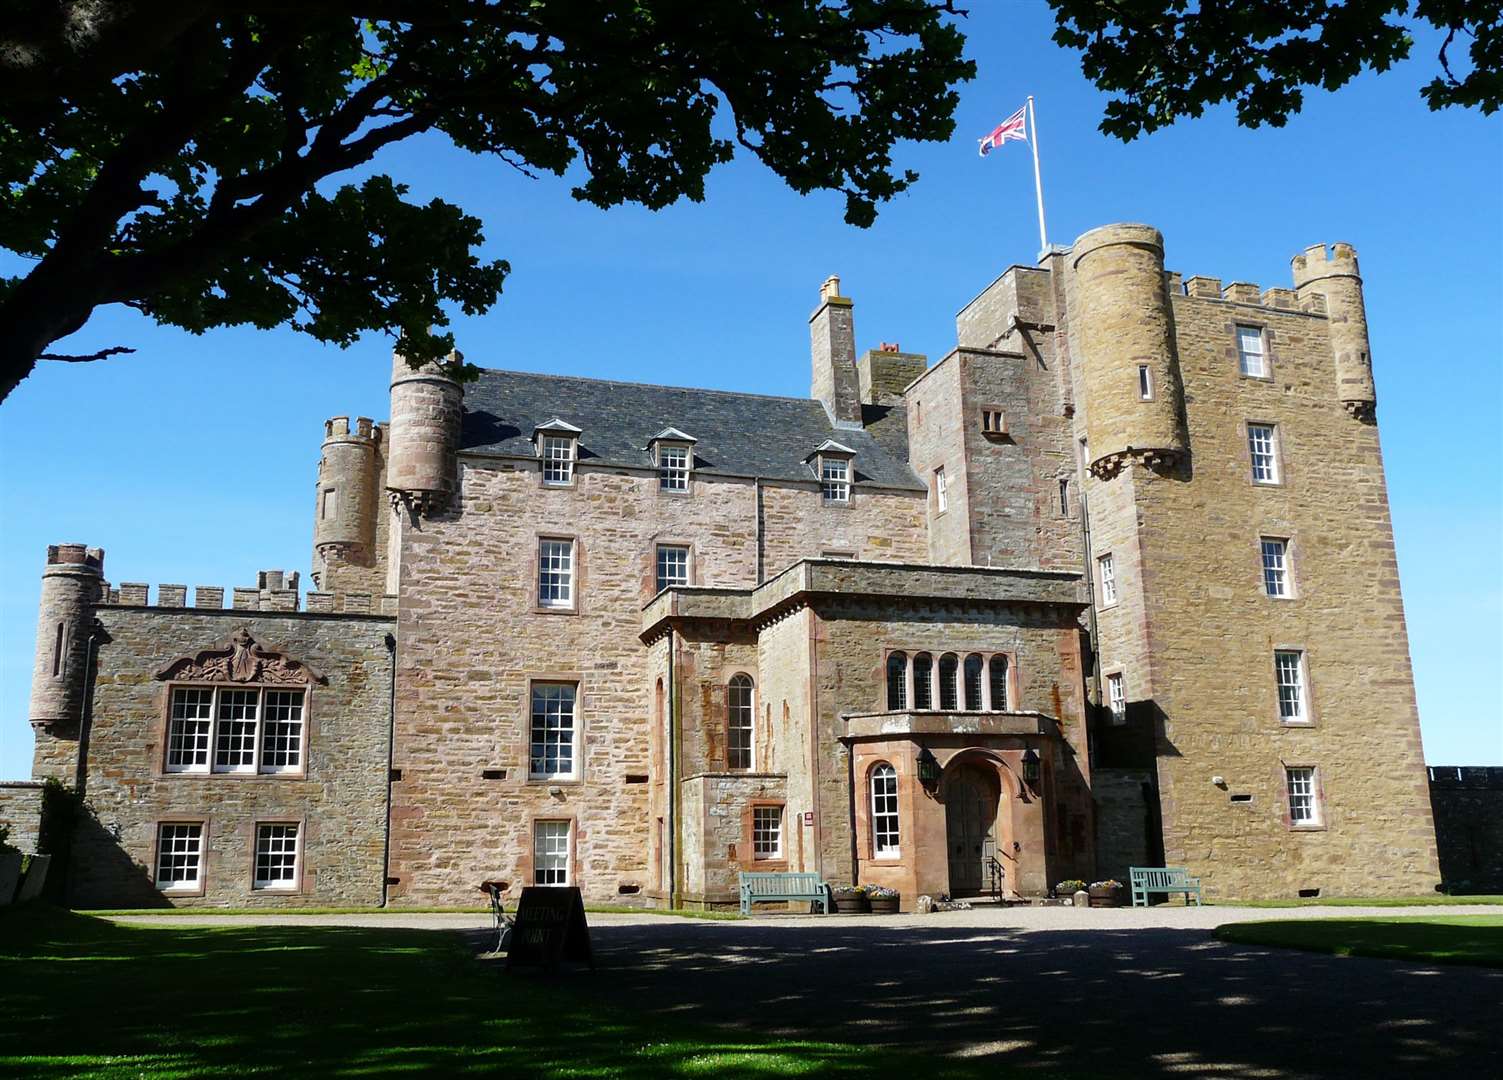 Harry and Meghan spent a few days at the Castle of Mey in the summer of 2018.